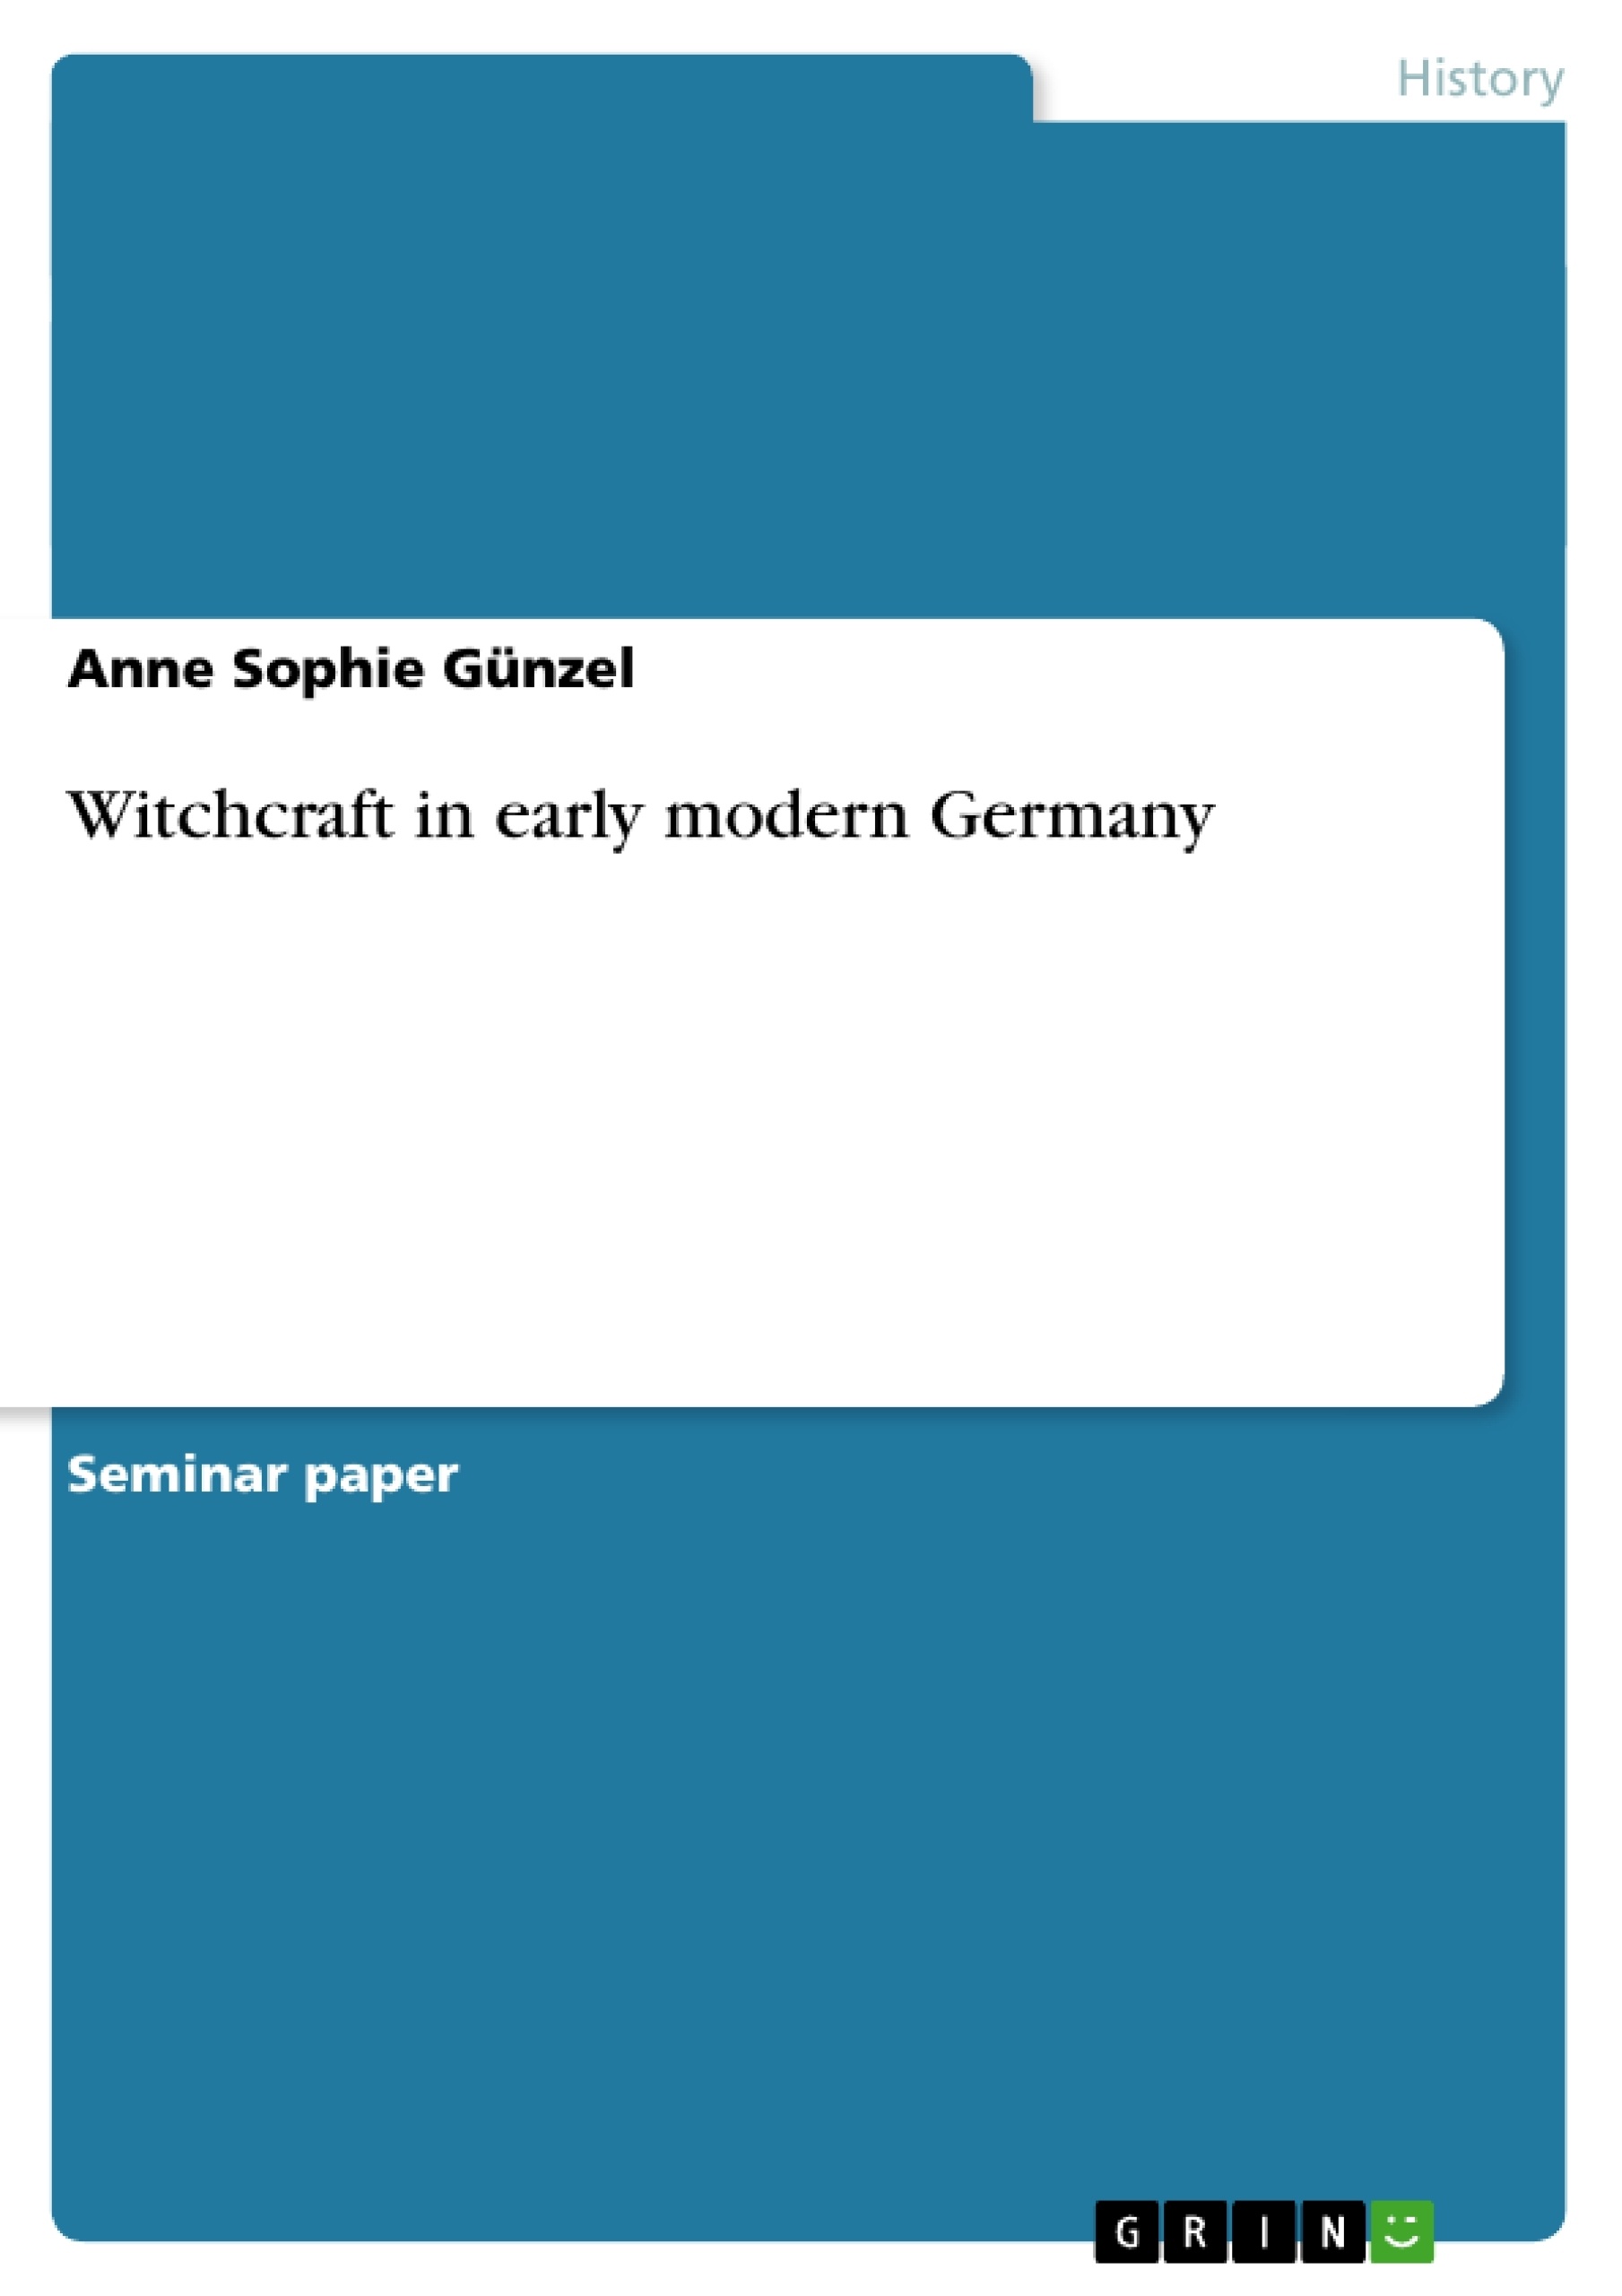 Title: Witchcraft in early modern Germany